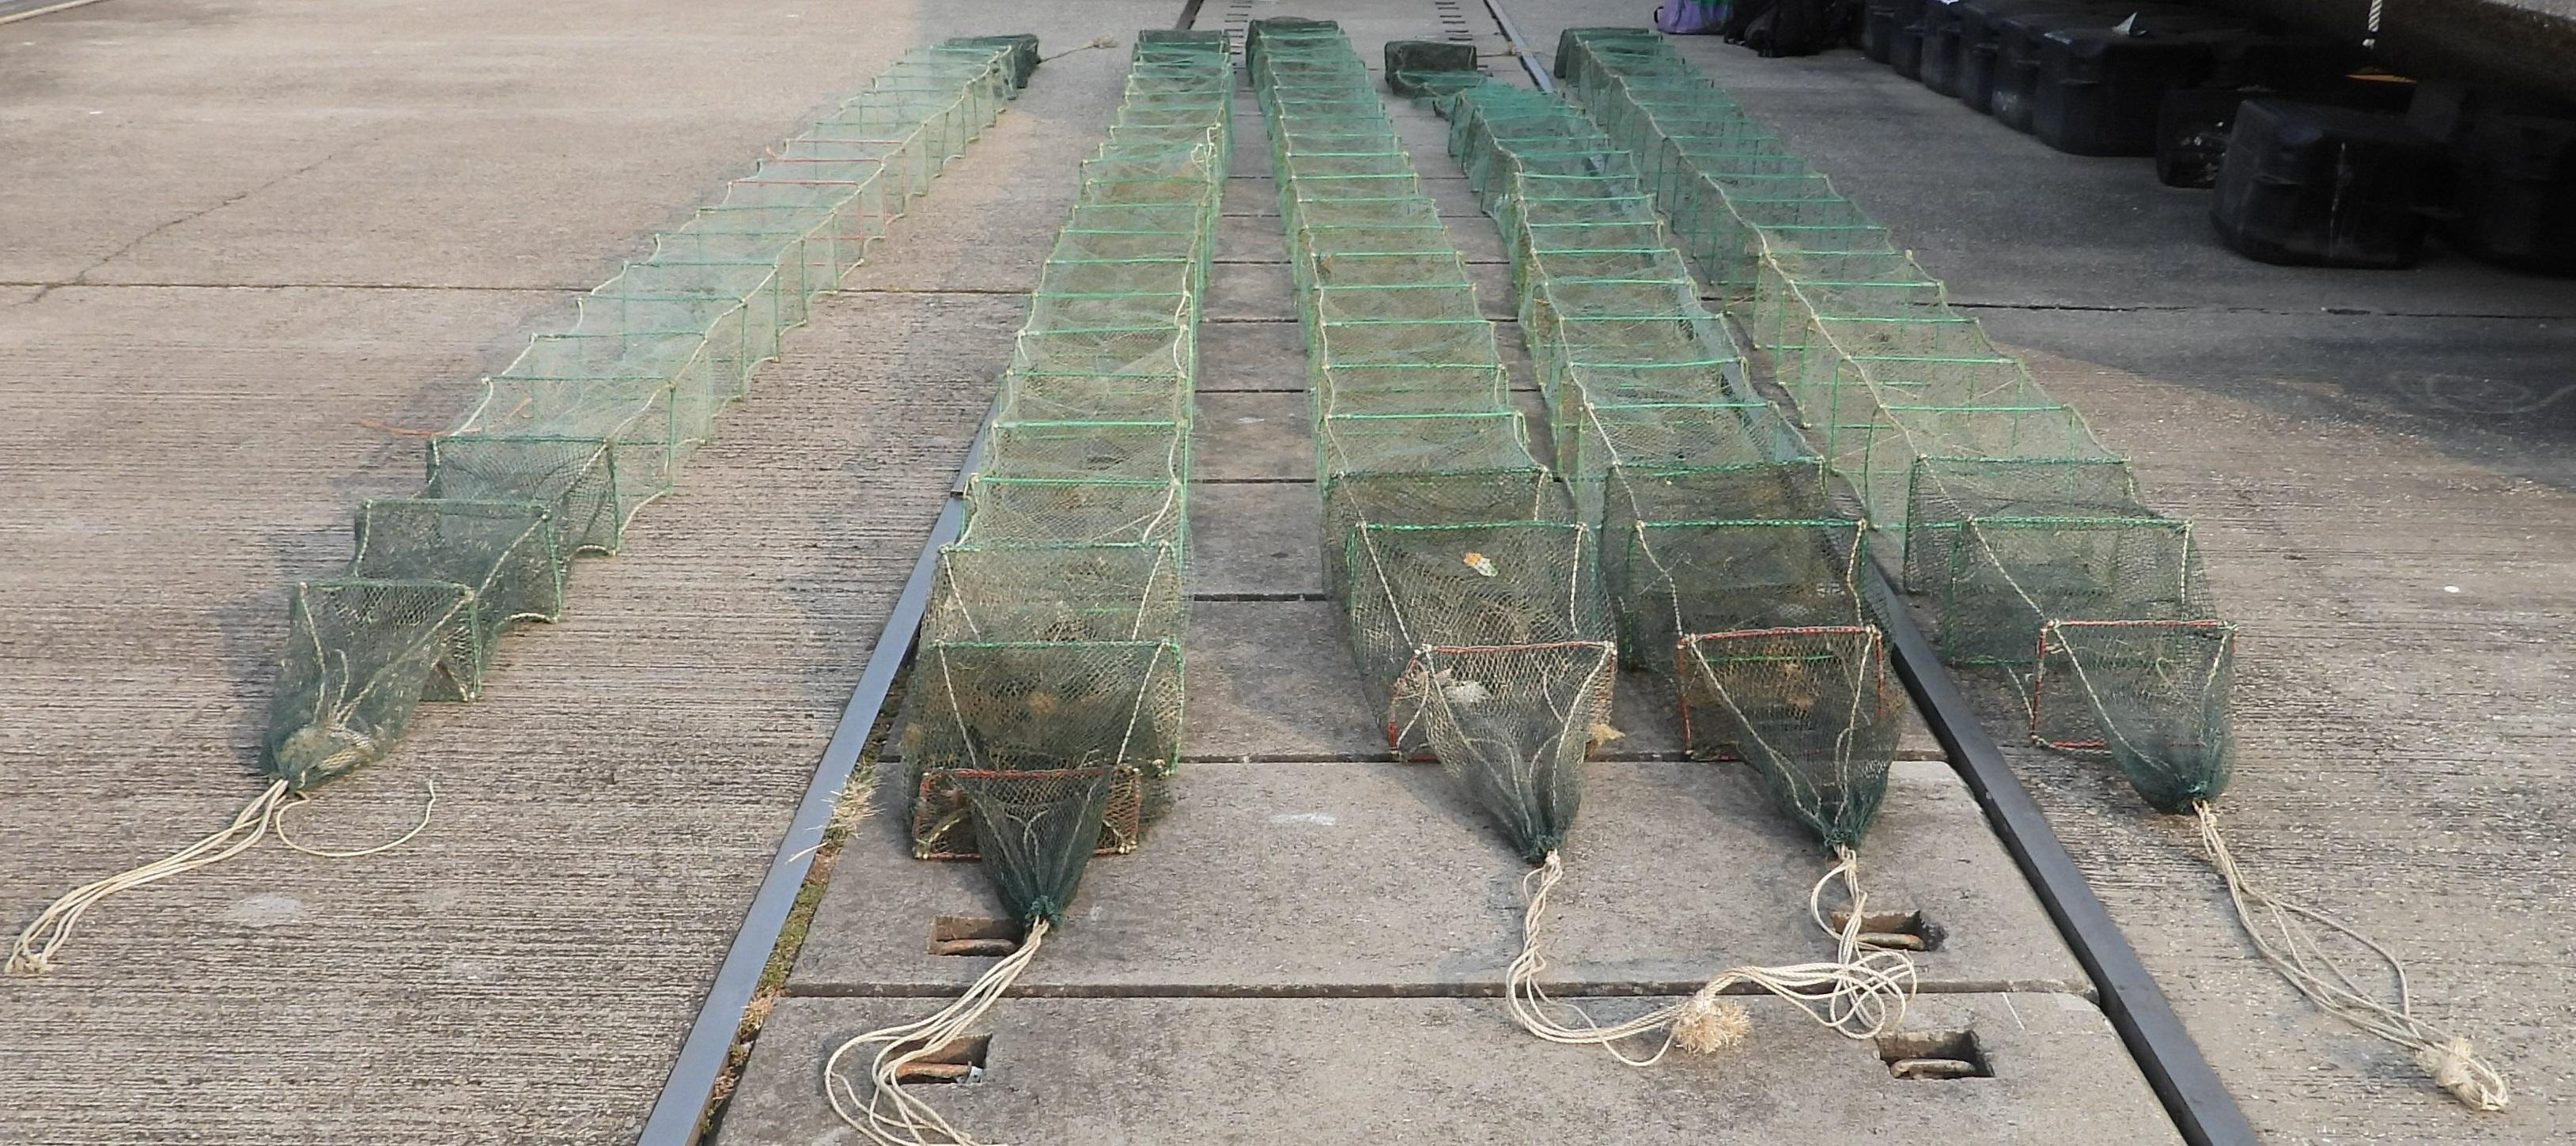 Four Mainland fisherman deckhands engaged in fishing using snake cages (a type of cage trap banned in Hong Kong waters) earlier in waters off the River Trade Terminal in western Hong Kong, and a local coxswain on board were charged for breaching the Fisheries Protection Ordinance (Cap. 171) and convicted today (March 8). Photo shows some of the seized snake cages.